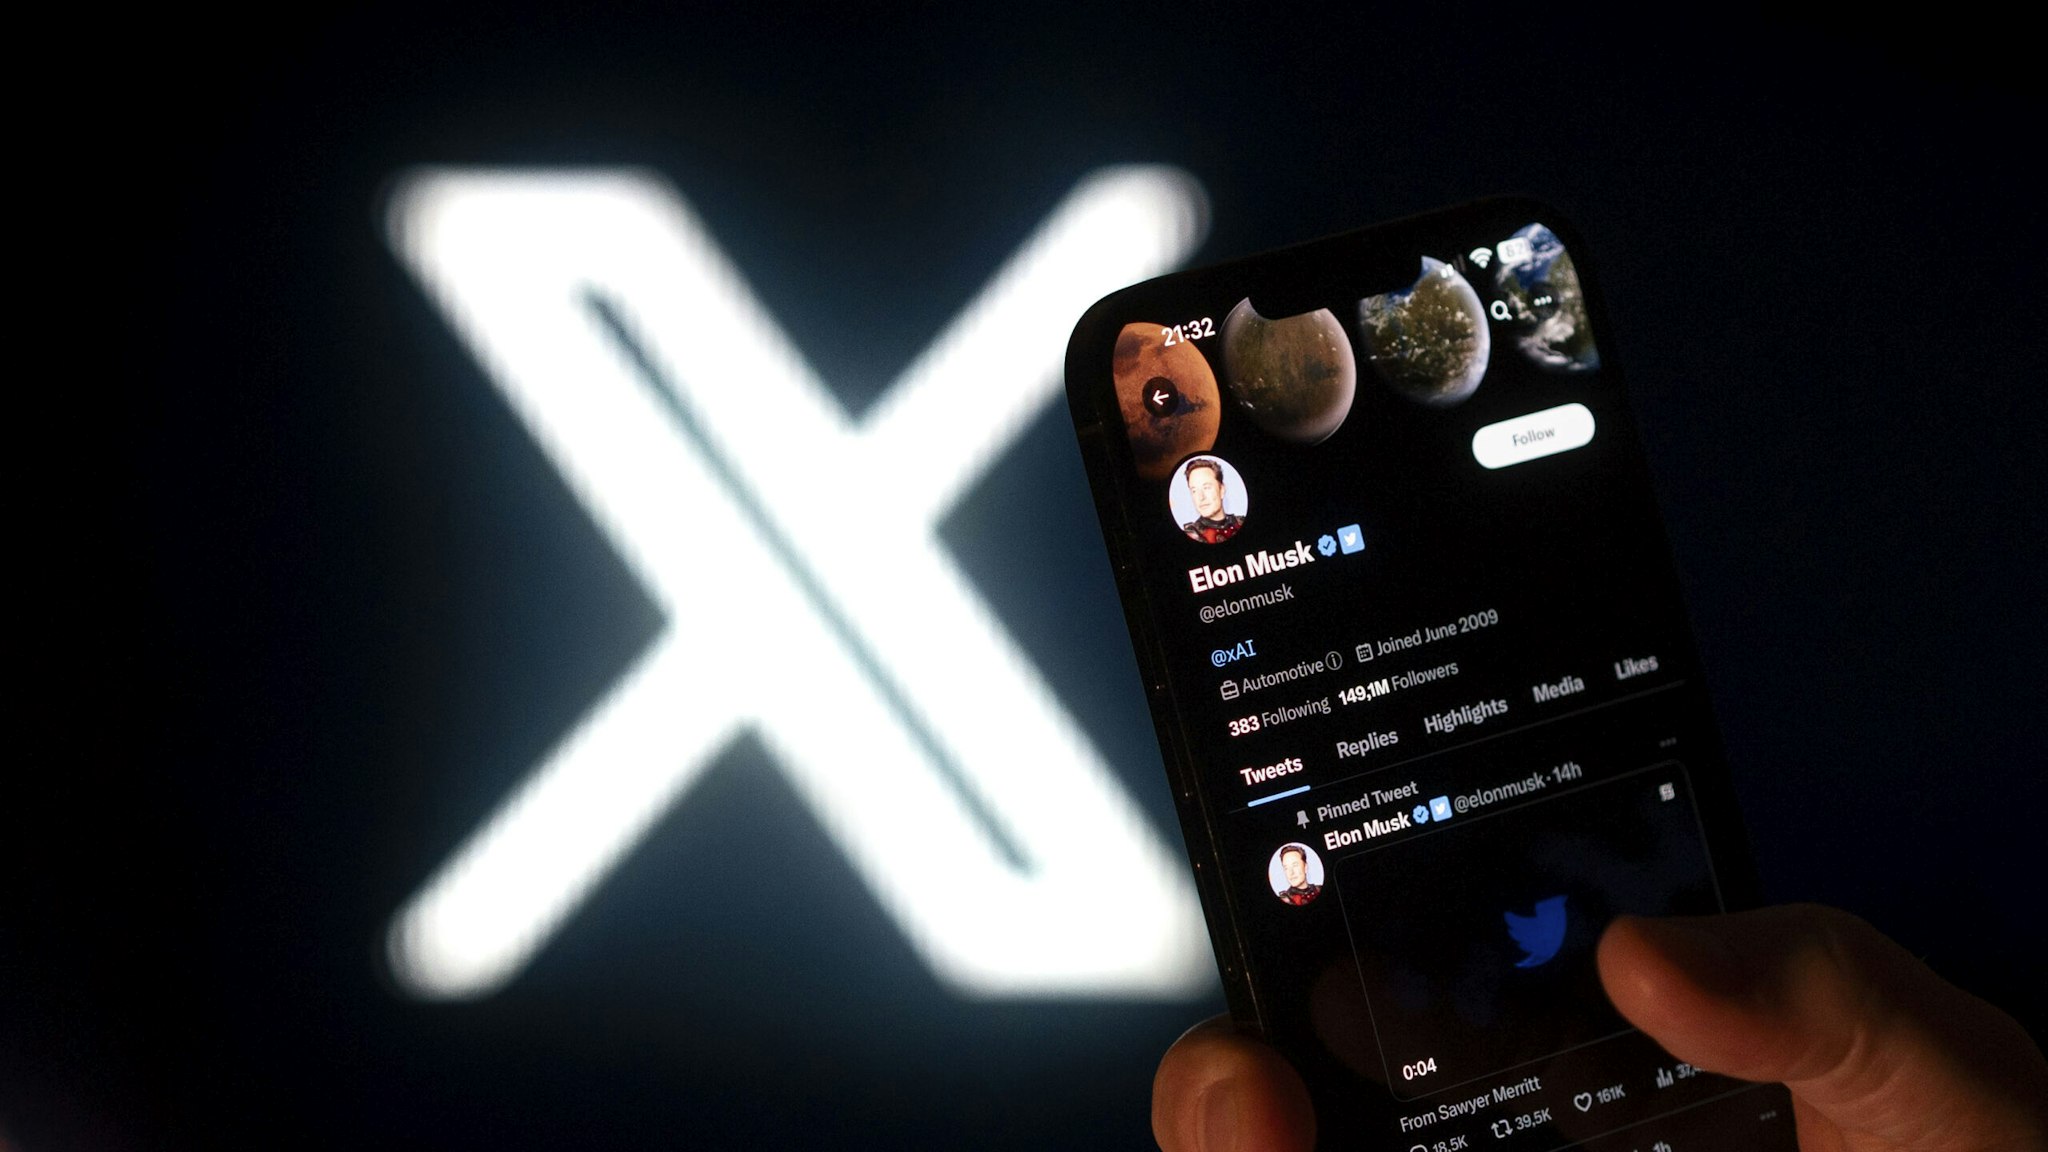 Elon Musk's Twitter page is seen on a mobile device with the X logo in the background in this photo illustration on 23 July, 2023 in Warsaw, Poland.